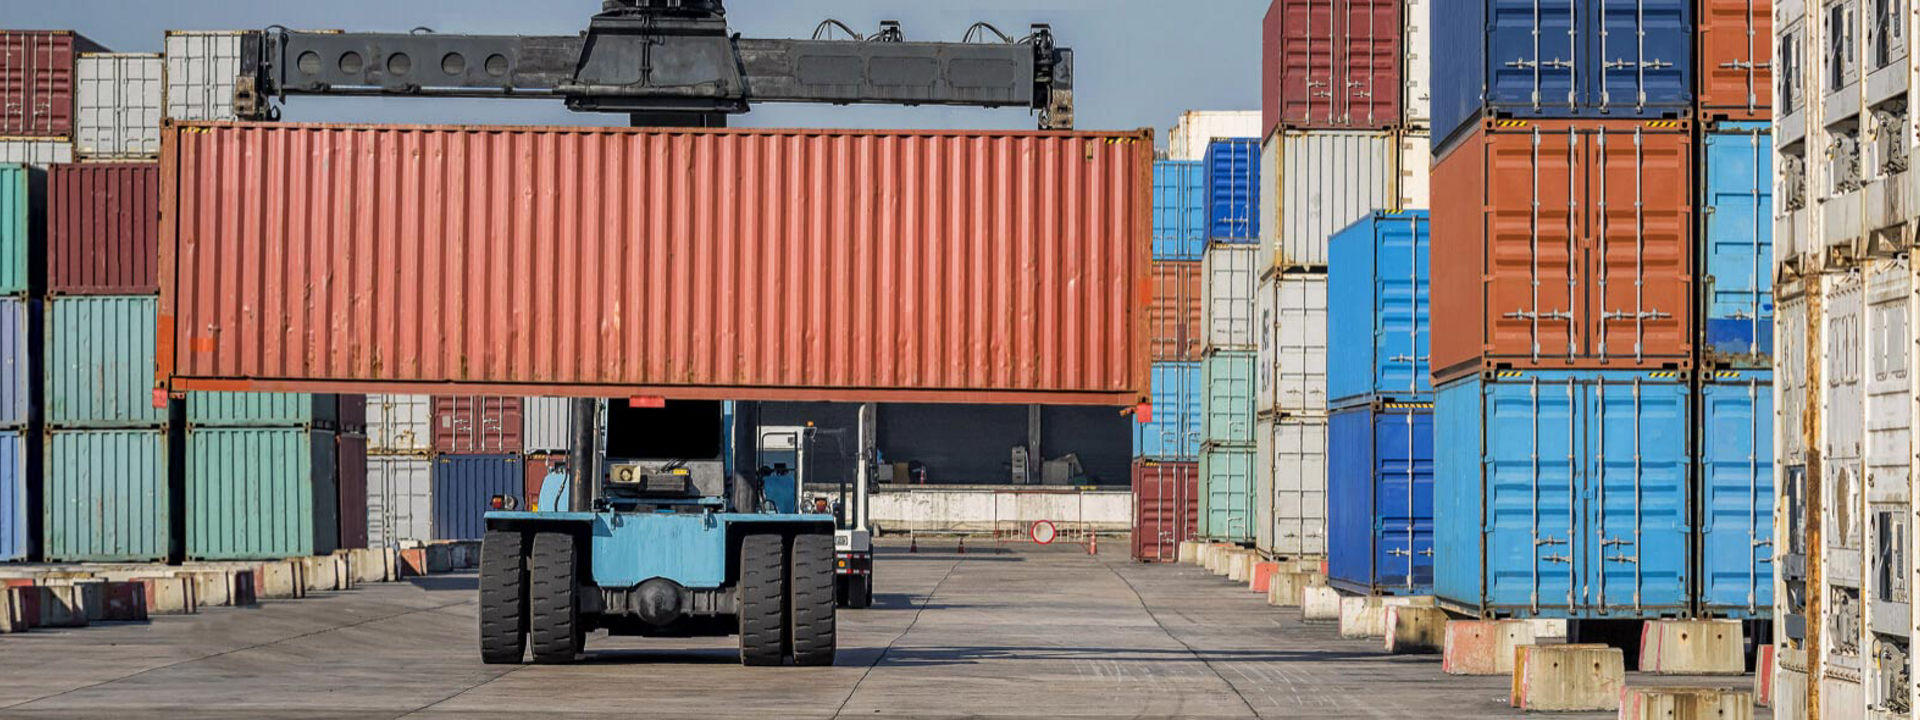 A forklift equipped with Bridgestone off-the-road tyres is moving shipping containers across a large industrial port